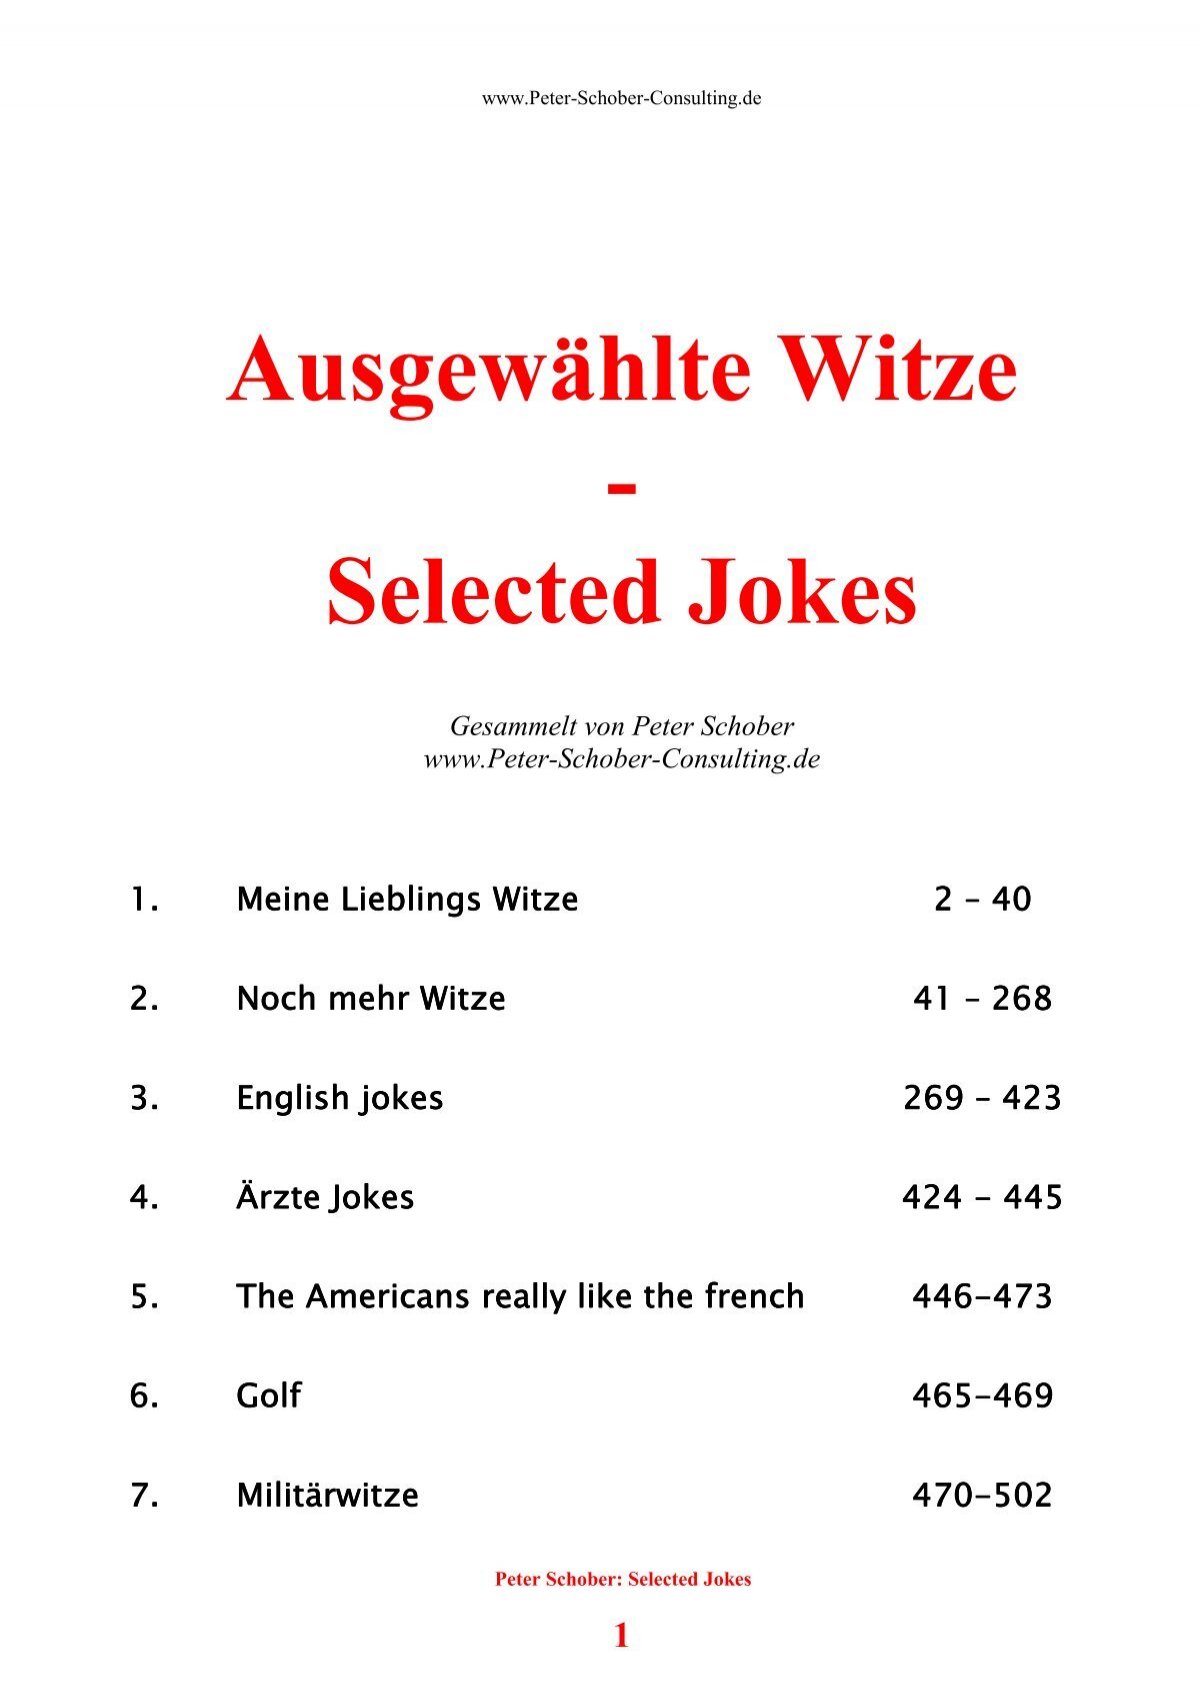 Ausgewählte Witze - - - Selected home Jokes Consulting.html